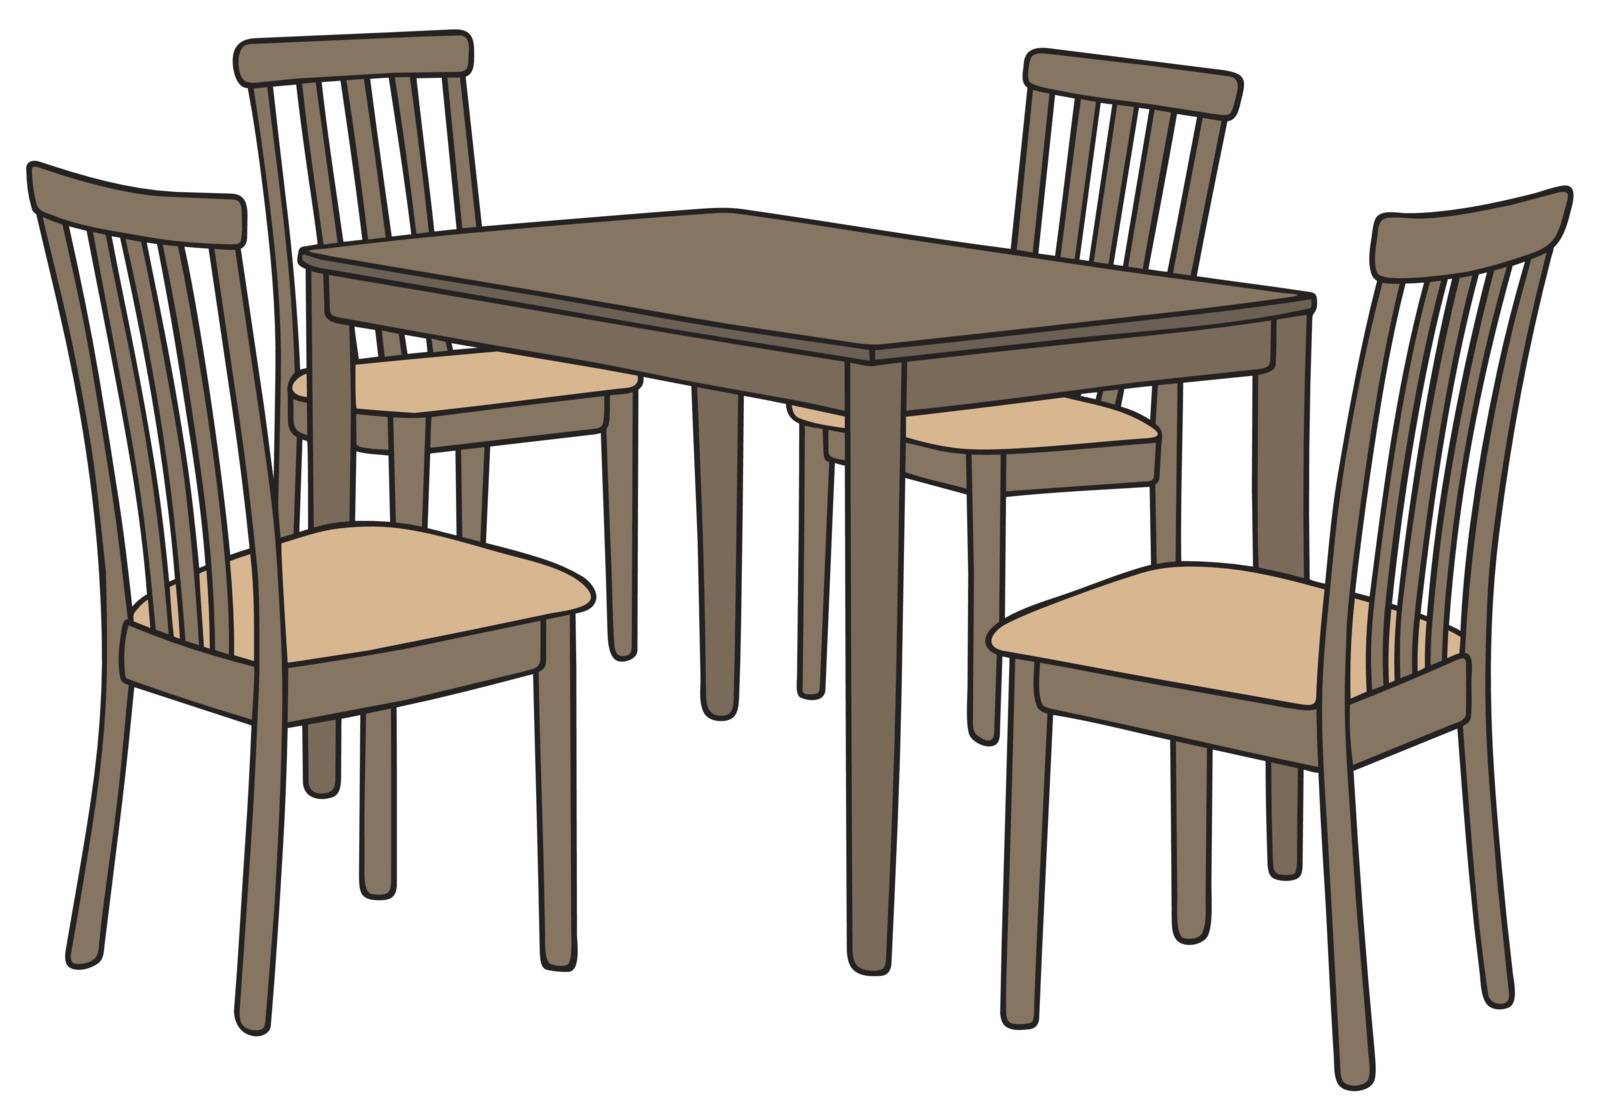 Table and chairs by vostal